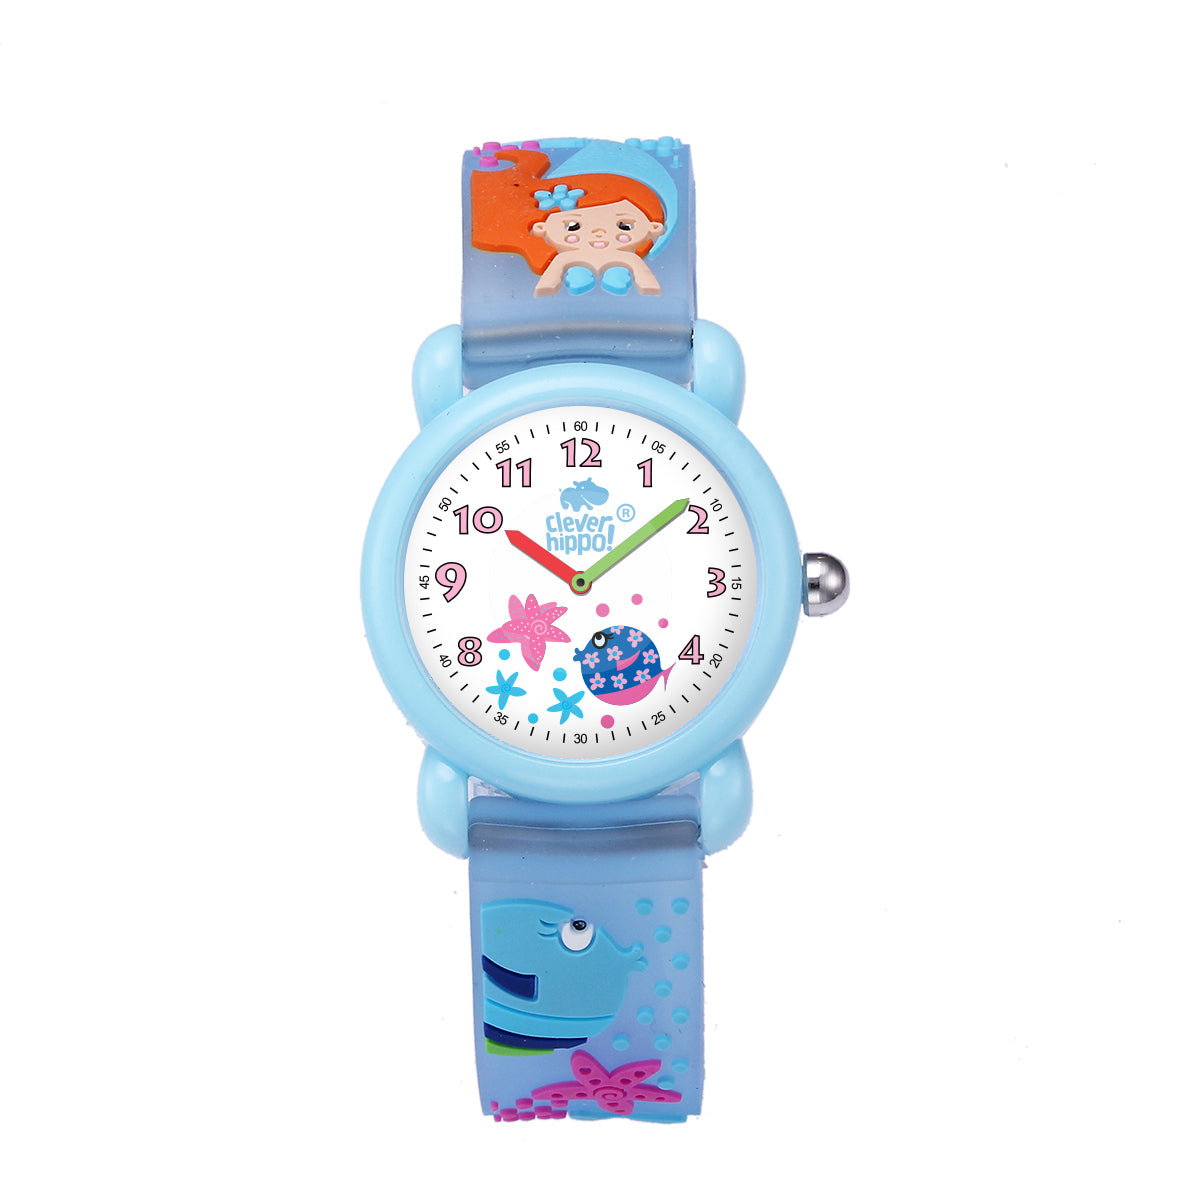 Đồng Hồ Clever Watch - Mermaid Xanh Cleverhippo Wg004